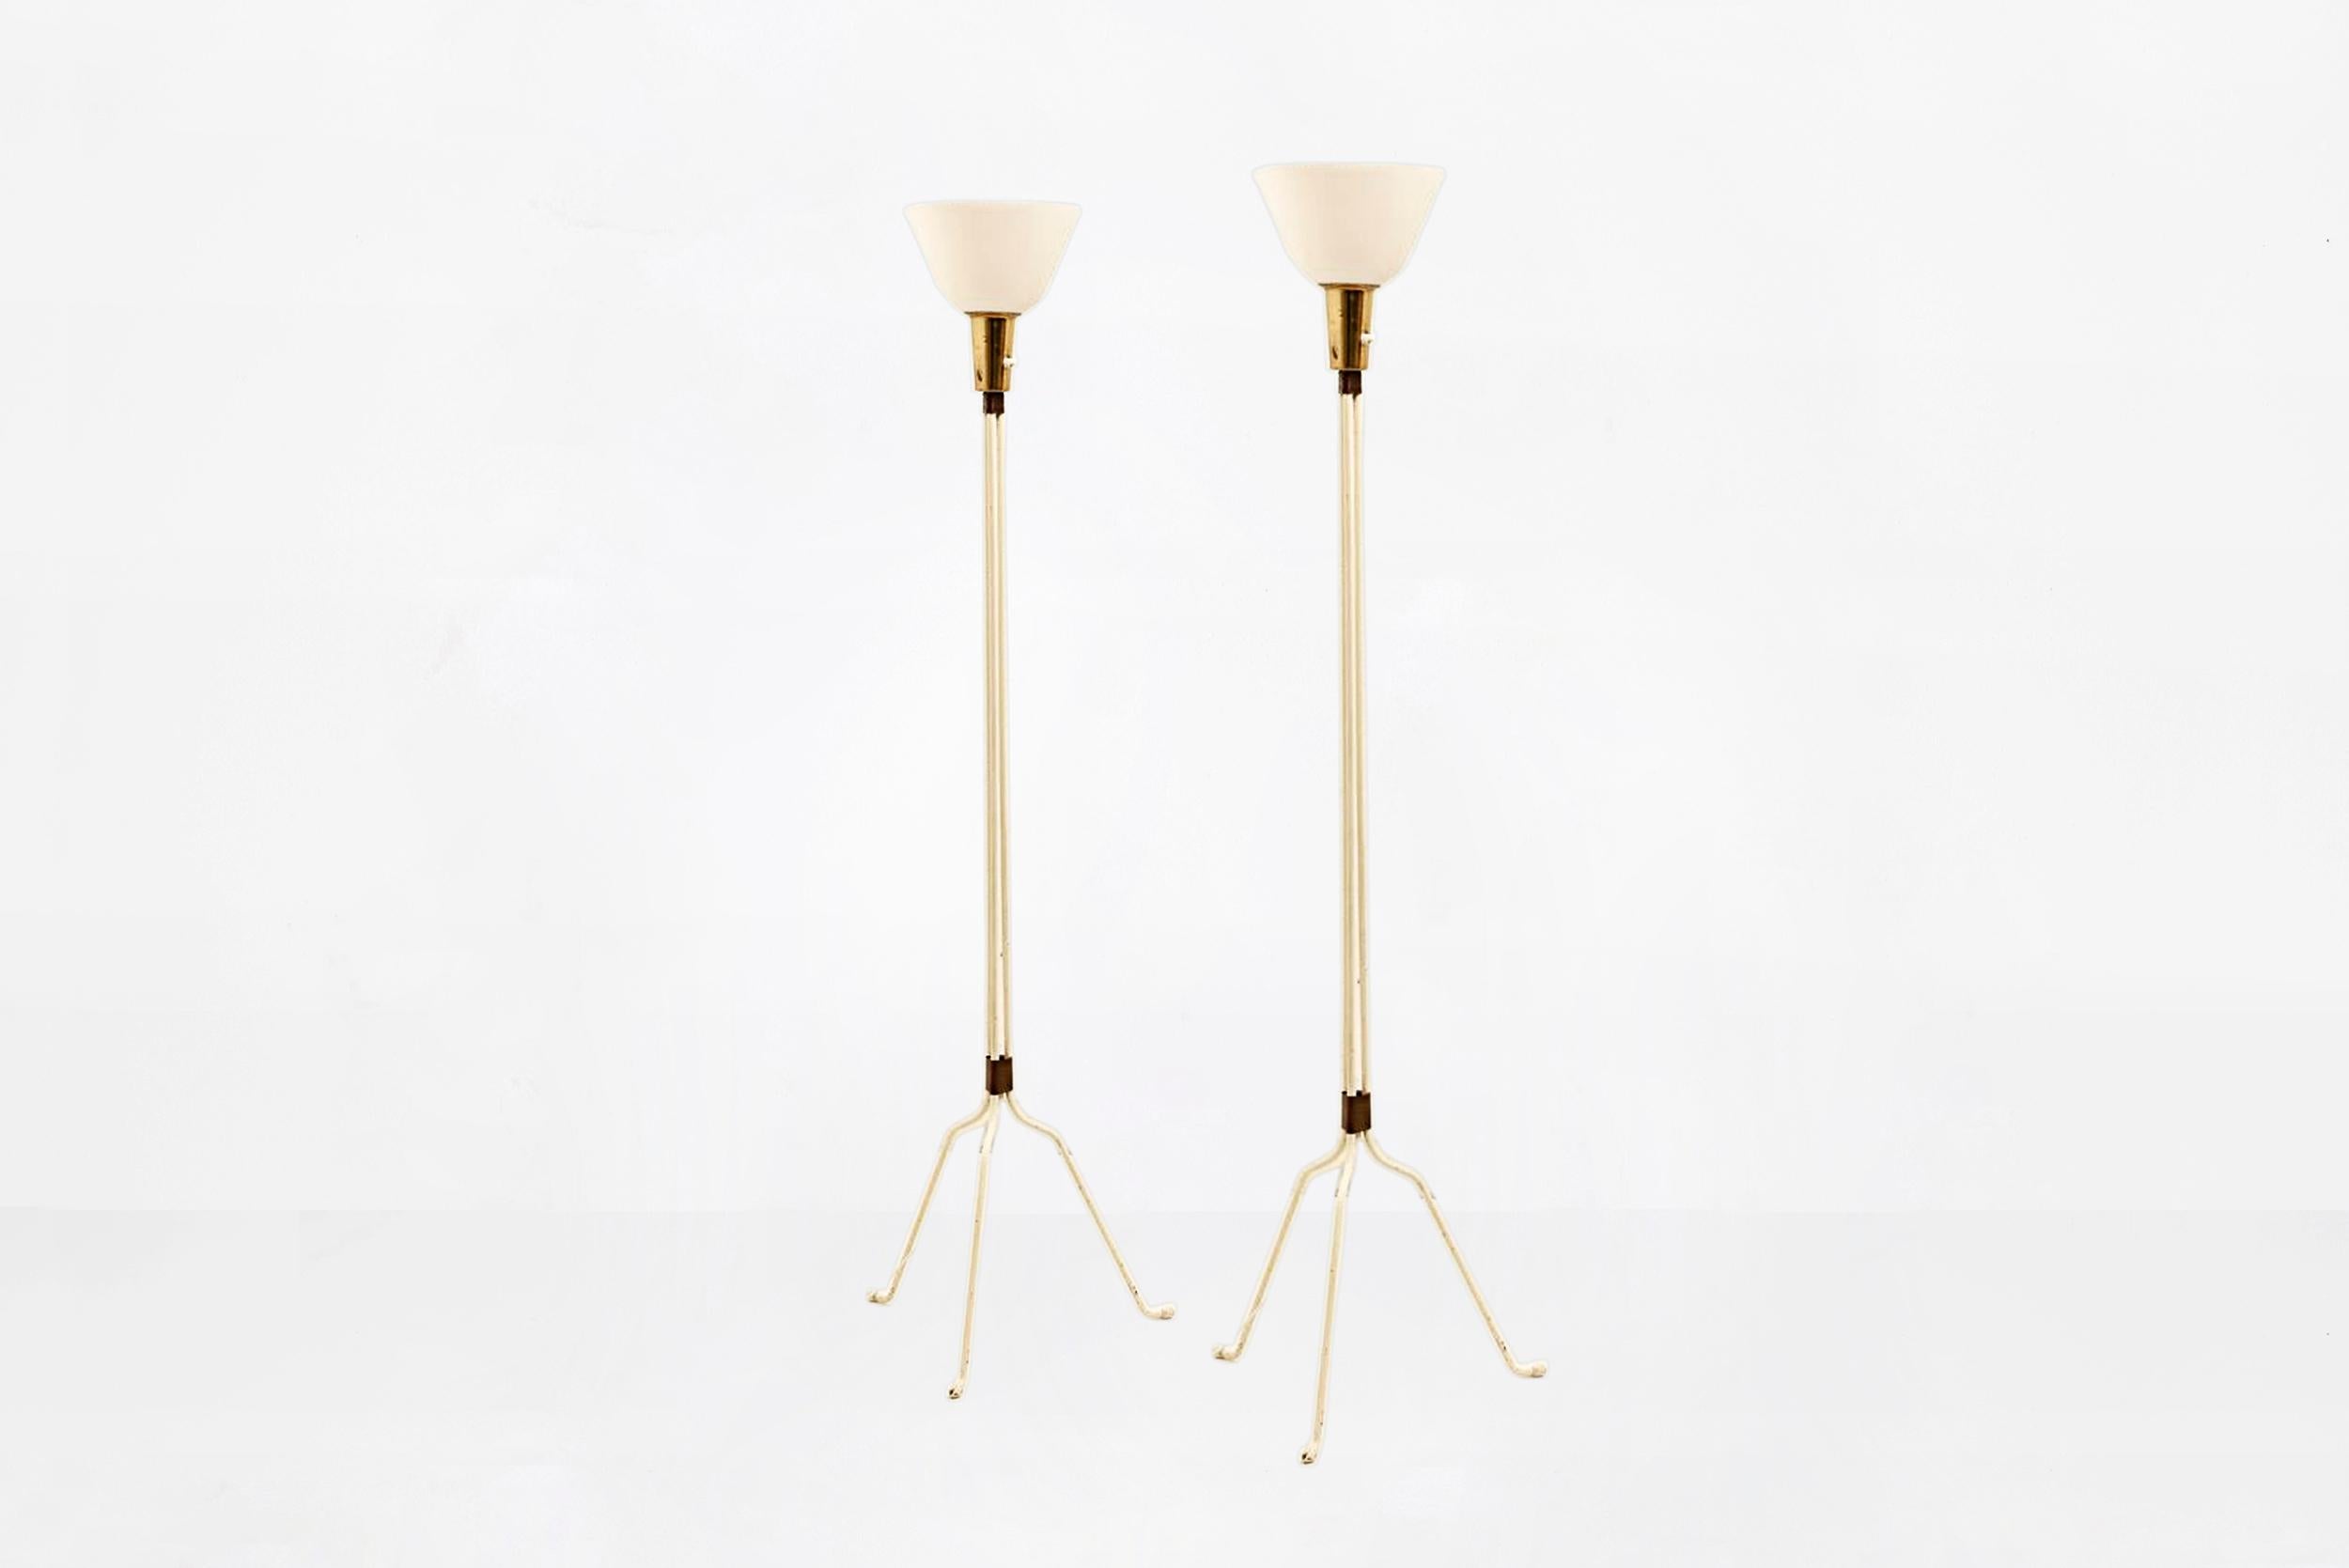 Lisa Johansson-Pape Pair of Floor Lamps Manufactured by Orno Finland, 1947 In Good Condition For Sale In Barcelona, ES